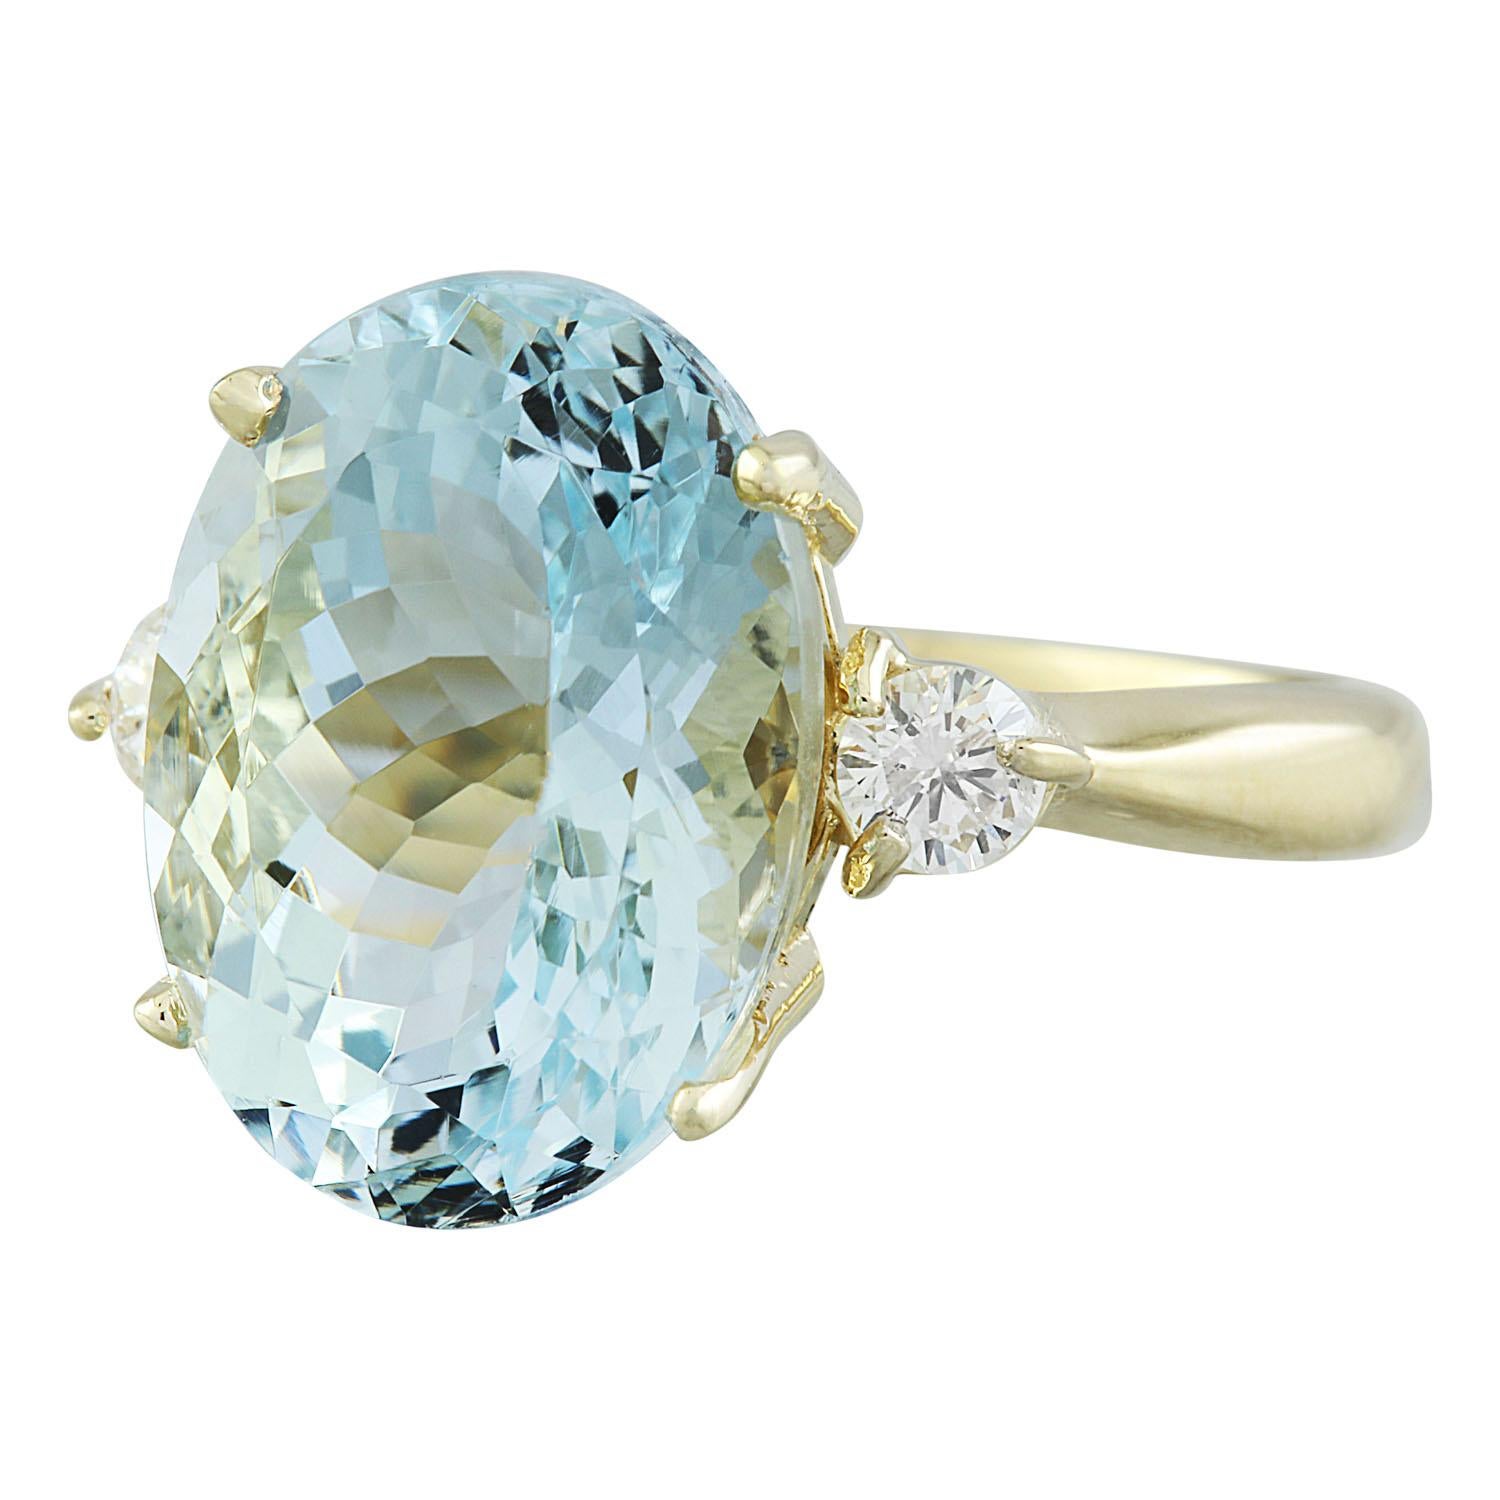 6.63 Carat Natural Aquamarine 14 Karat Solid Yellow Gold Diamond Ring
Stamped: 14K 
Total Ring Weight: 3.5 Grams 
Aquamarine Weight 6.43 Carat (14.00x10.00 Millimeters)
Diamond Weight: 0.20 carat (F-G Color, VS2-SI1 Clarity )
Quantity: 2
Face